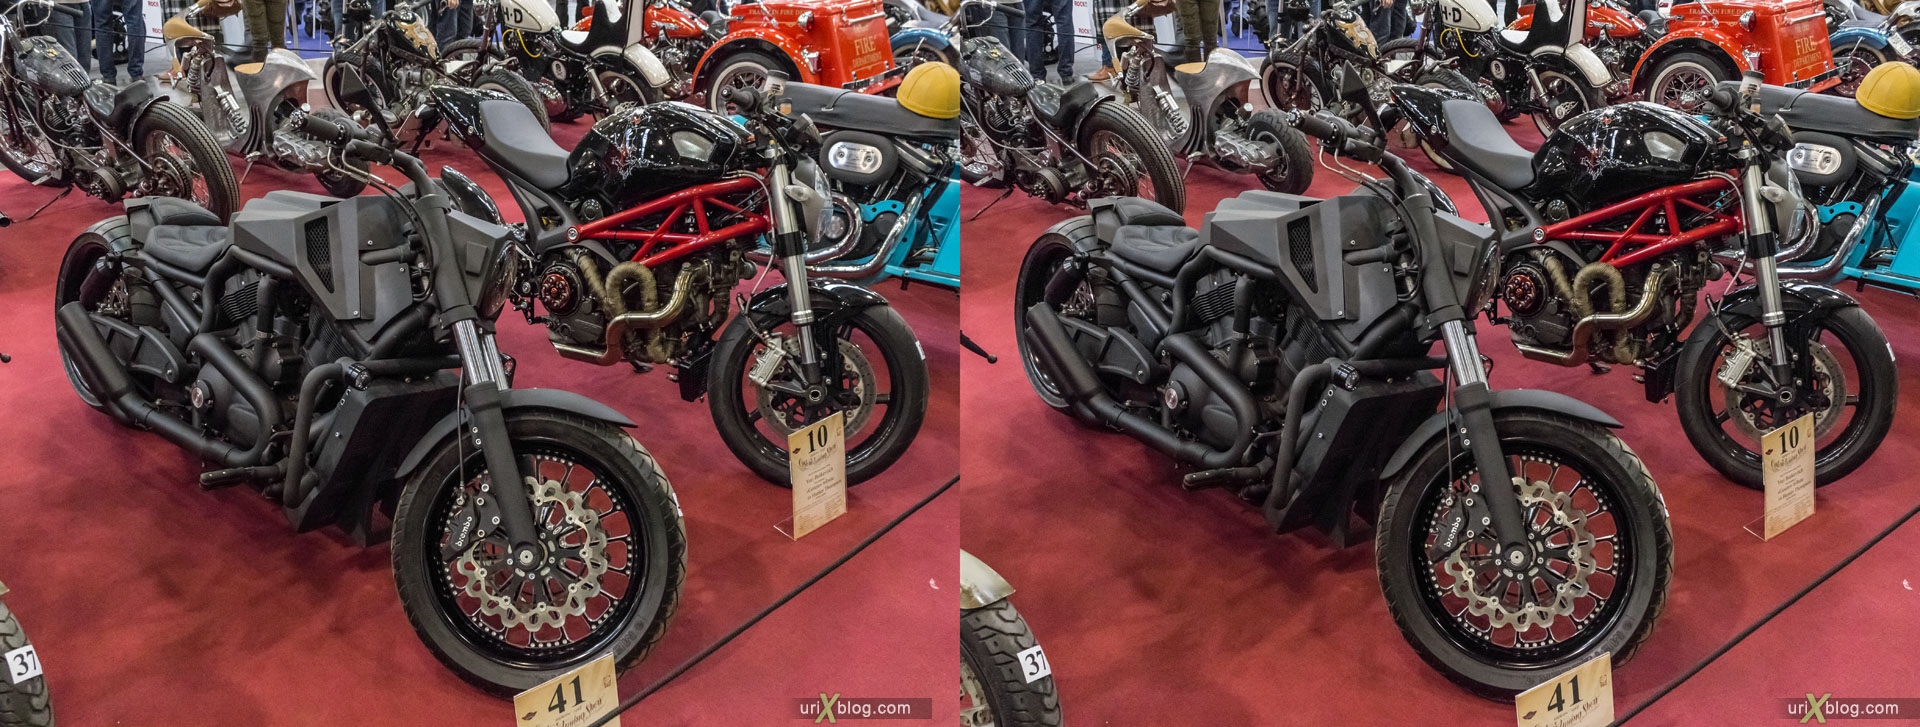 Moto park, exhibition, Crocus Expo, Moscow, Russia, 3D, stereo pair, cross-eyed, crossview, cross view stereo pair, stereoscopic, 2015